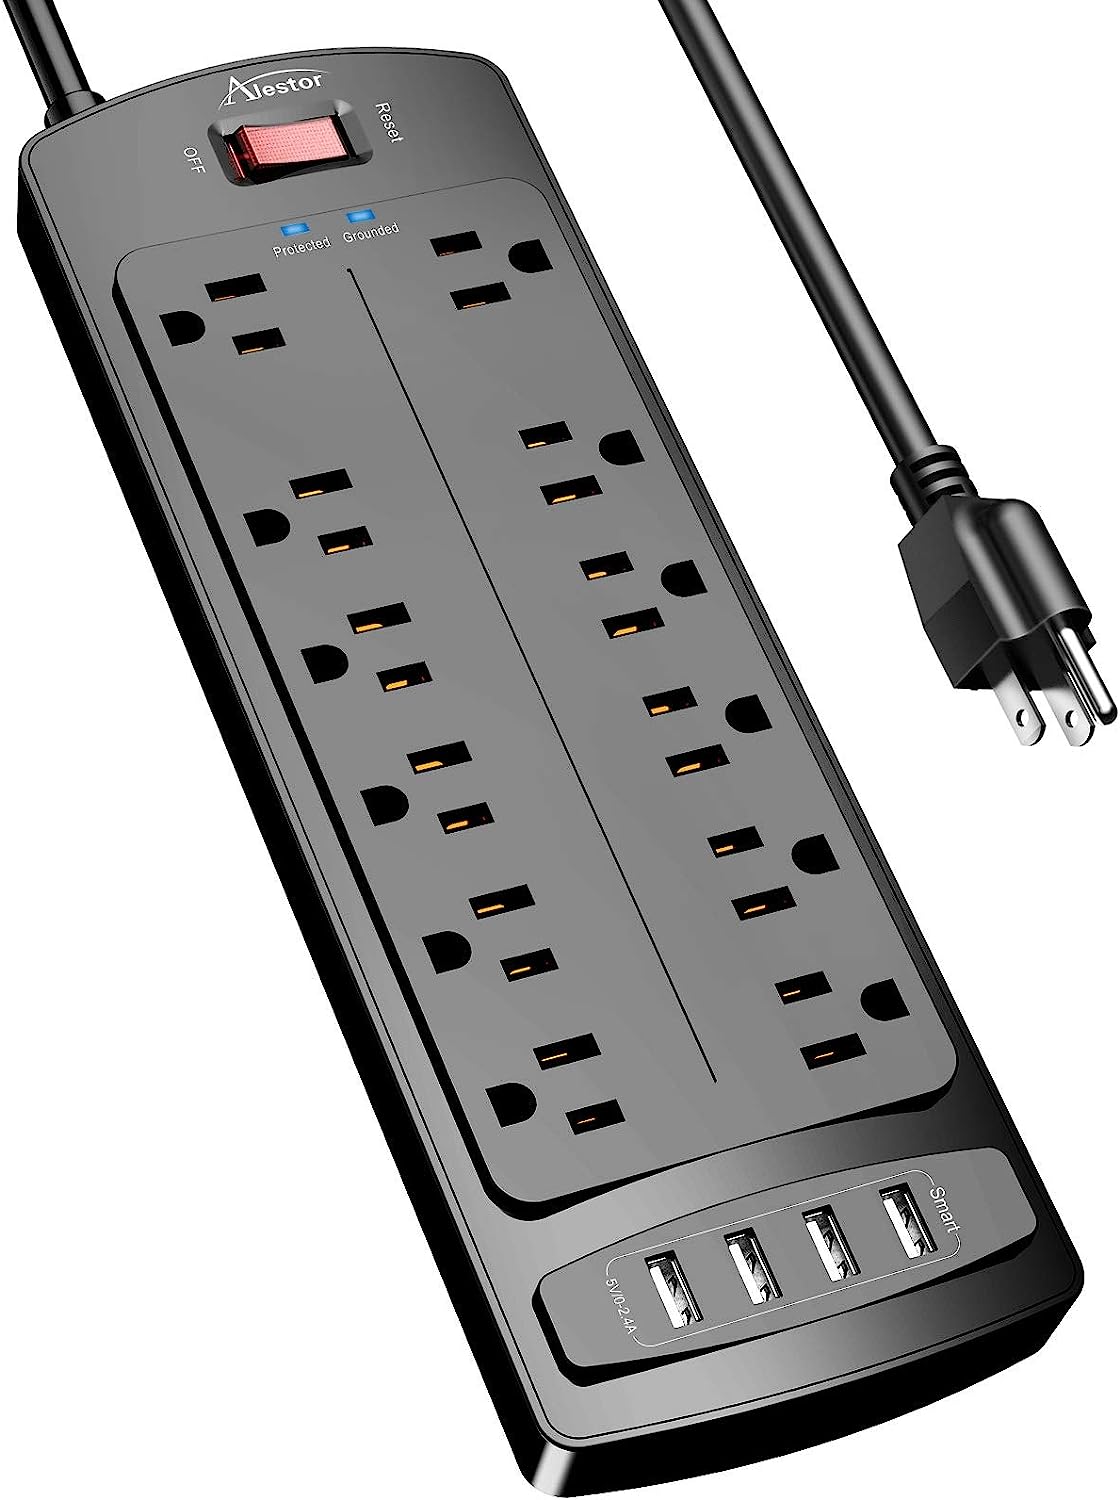 Power Strip, ALESTOR Surge Protector with 12 Outlets [...]